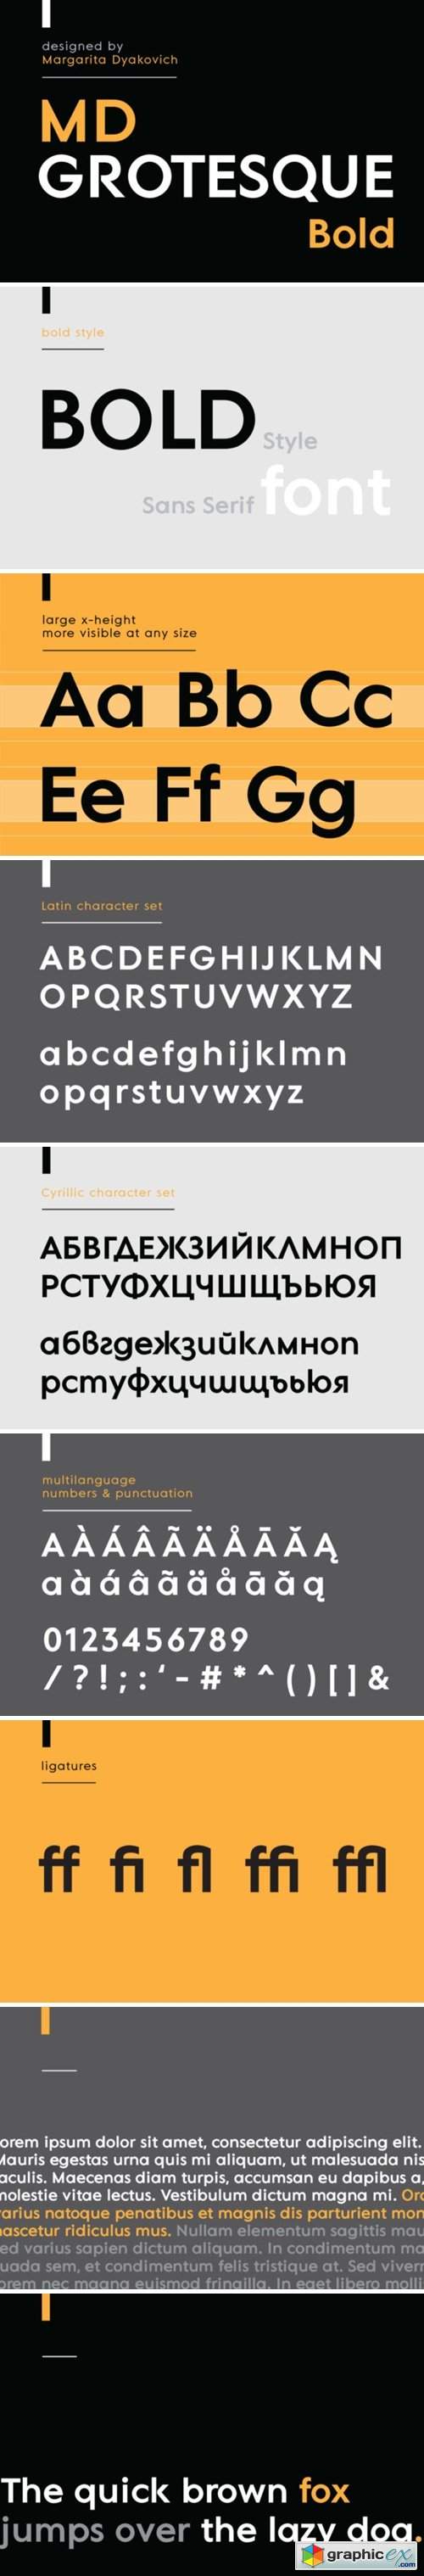 MD Grotesque Bold Font